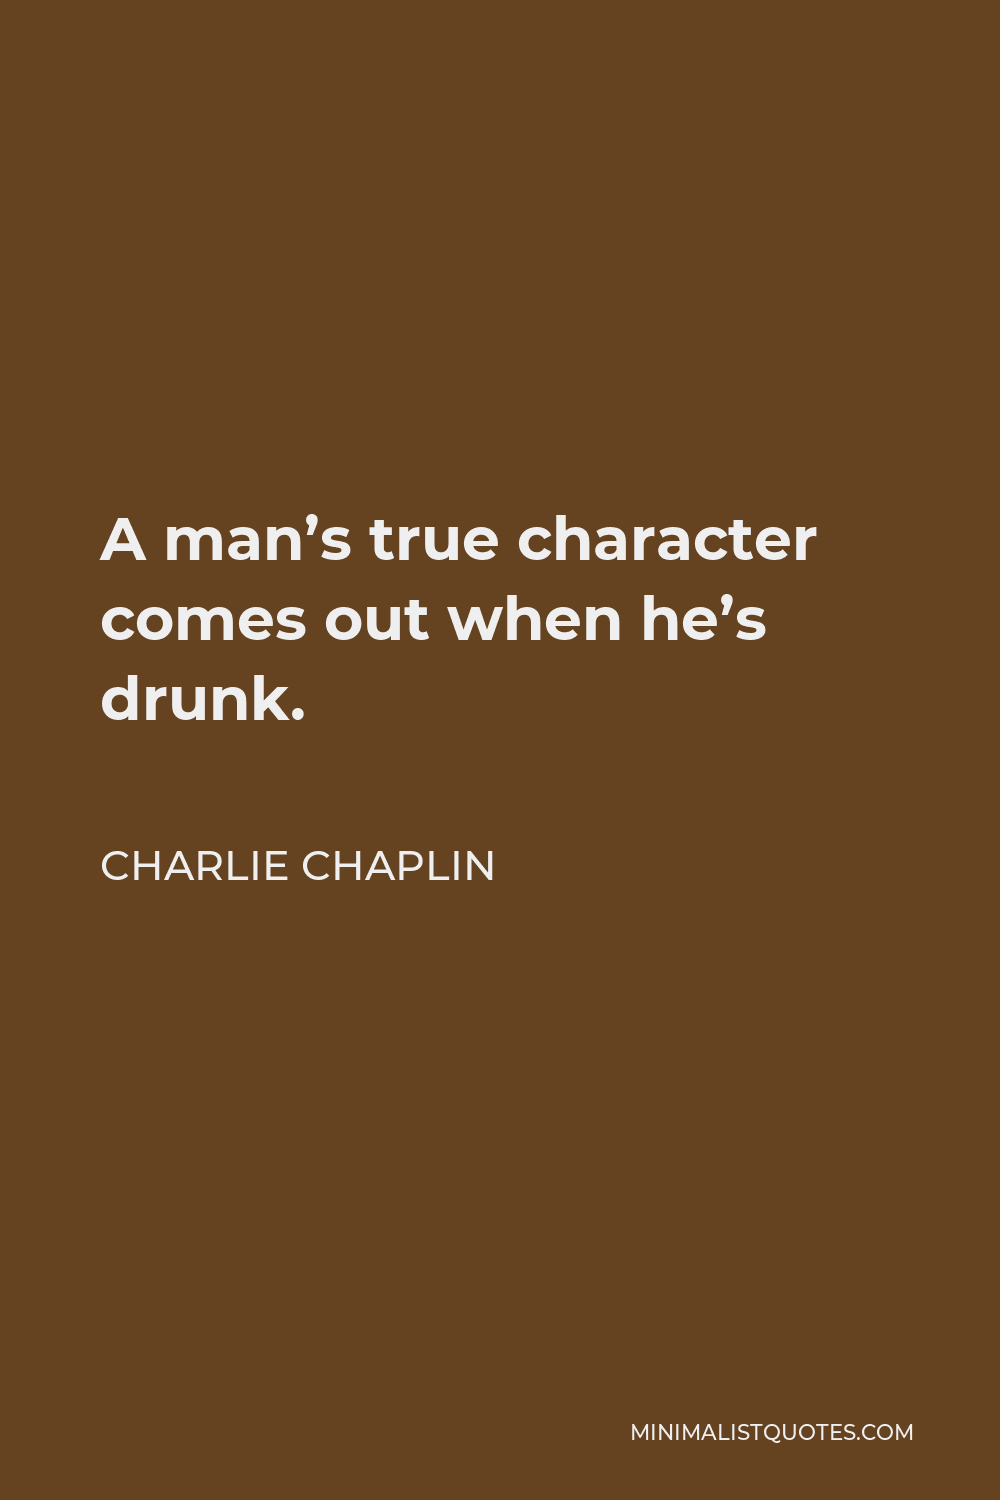 Charlie Chaplin Quote - A man’s true character comes out when he’s drunk.